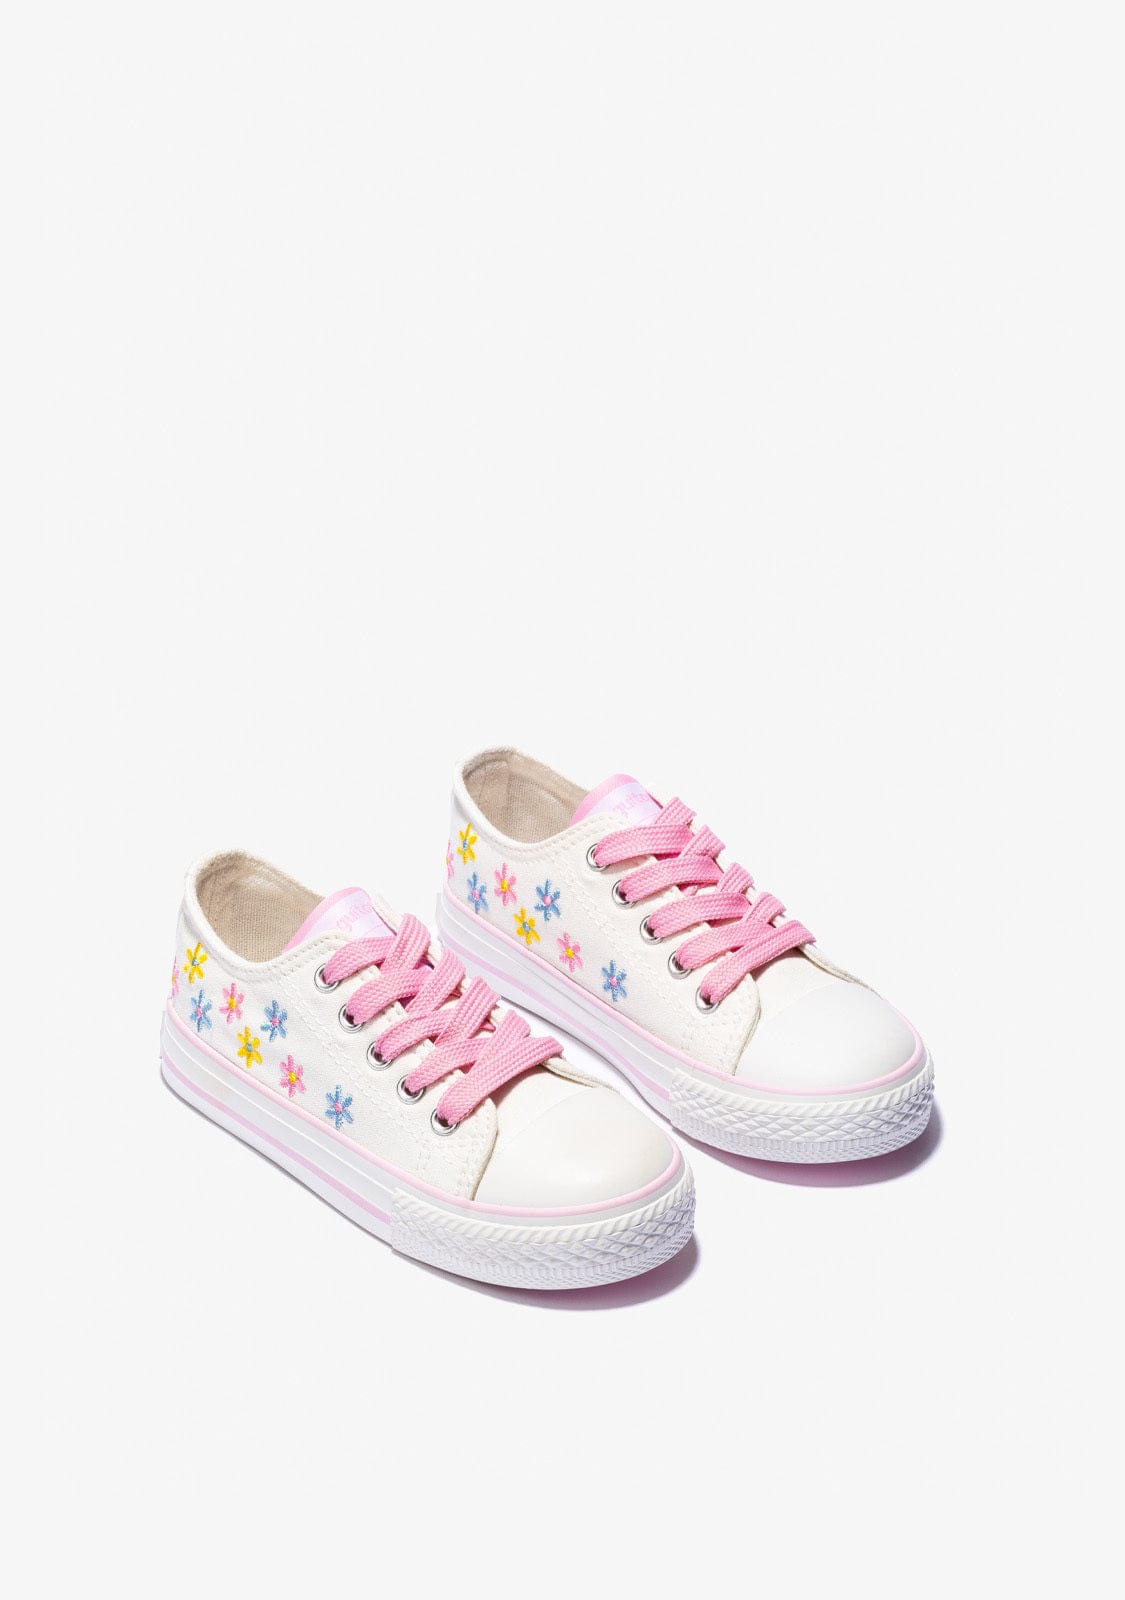 CONGUITOS Shoes Girl's White Flowers Sneakers Canvas